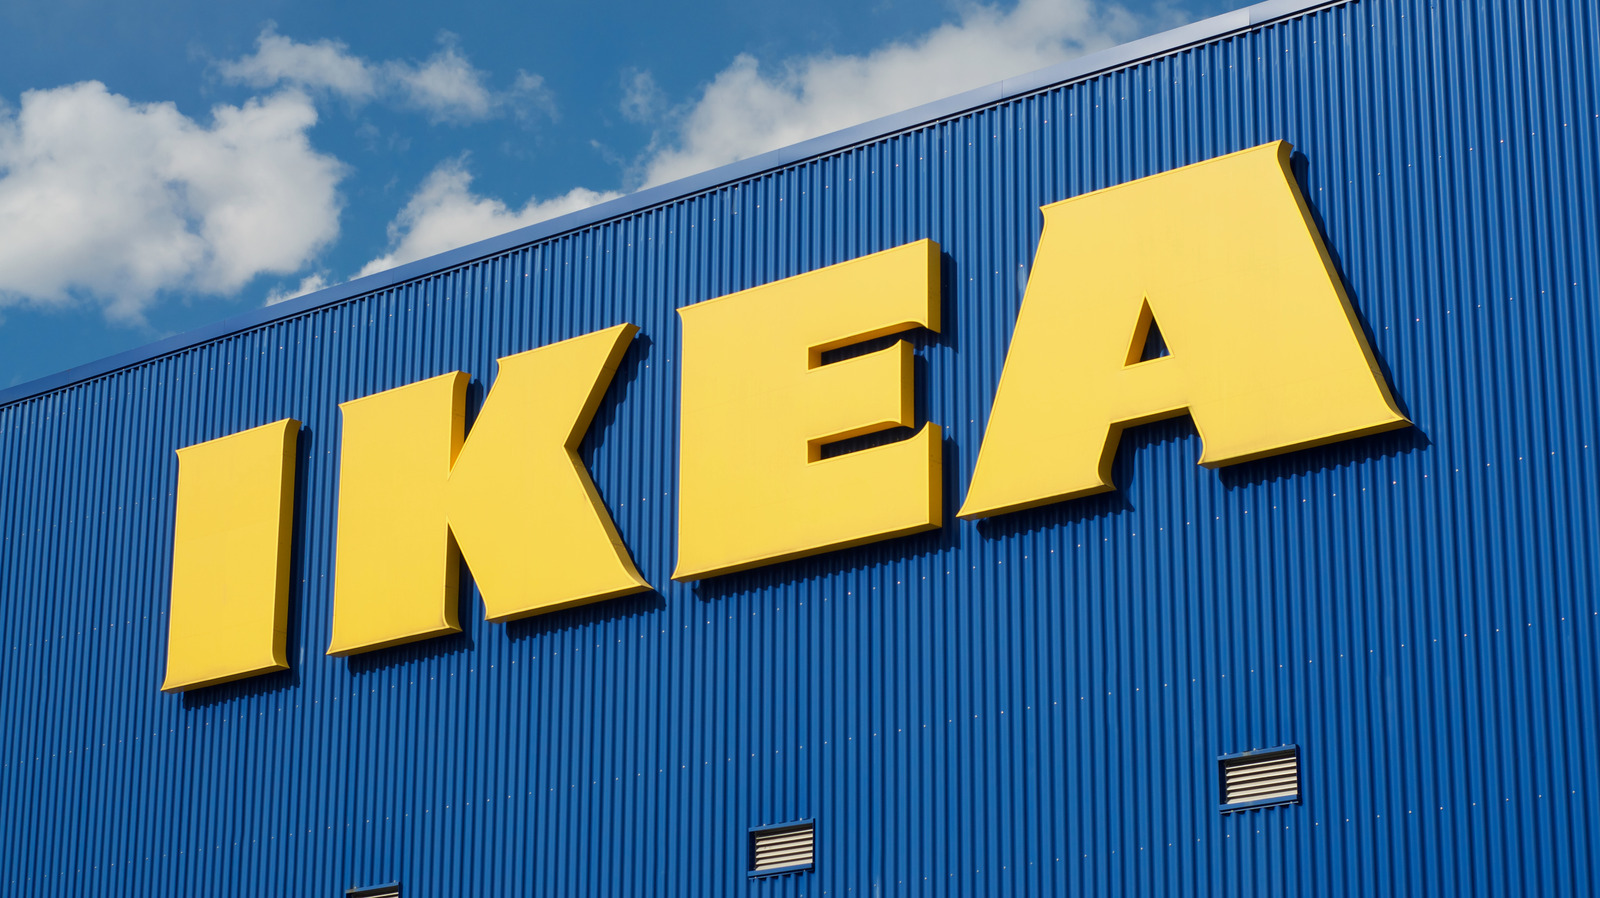 The Real Meaning Behind IKEA s Brand Name